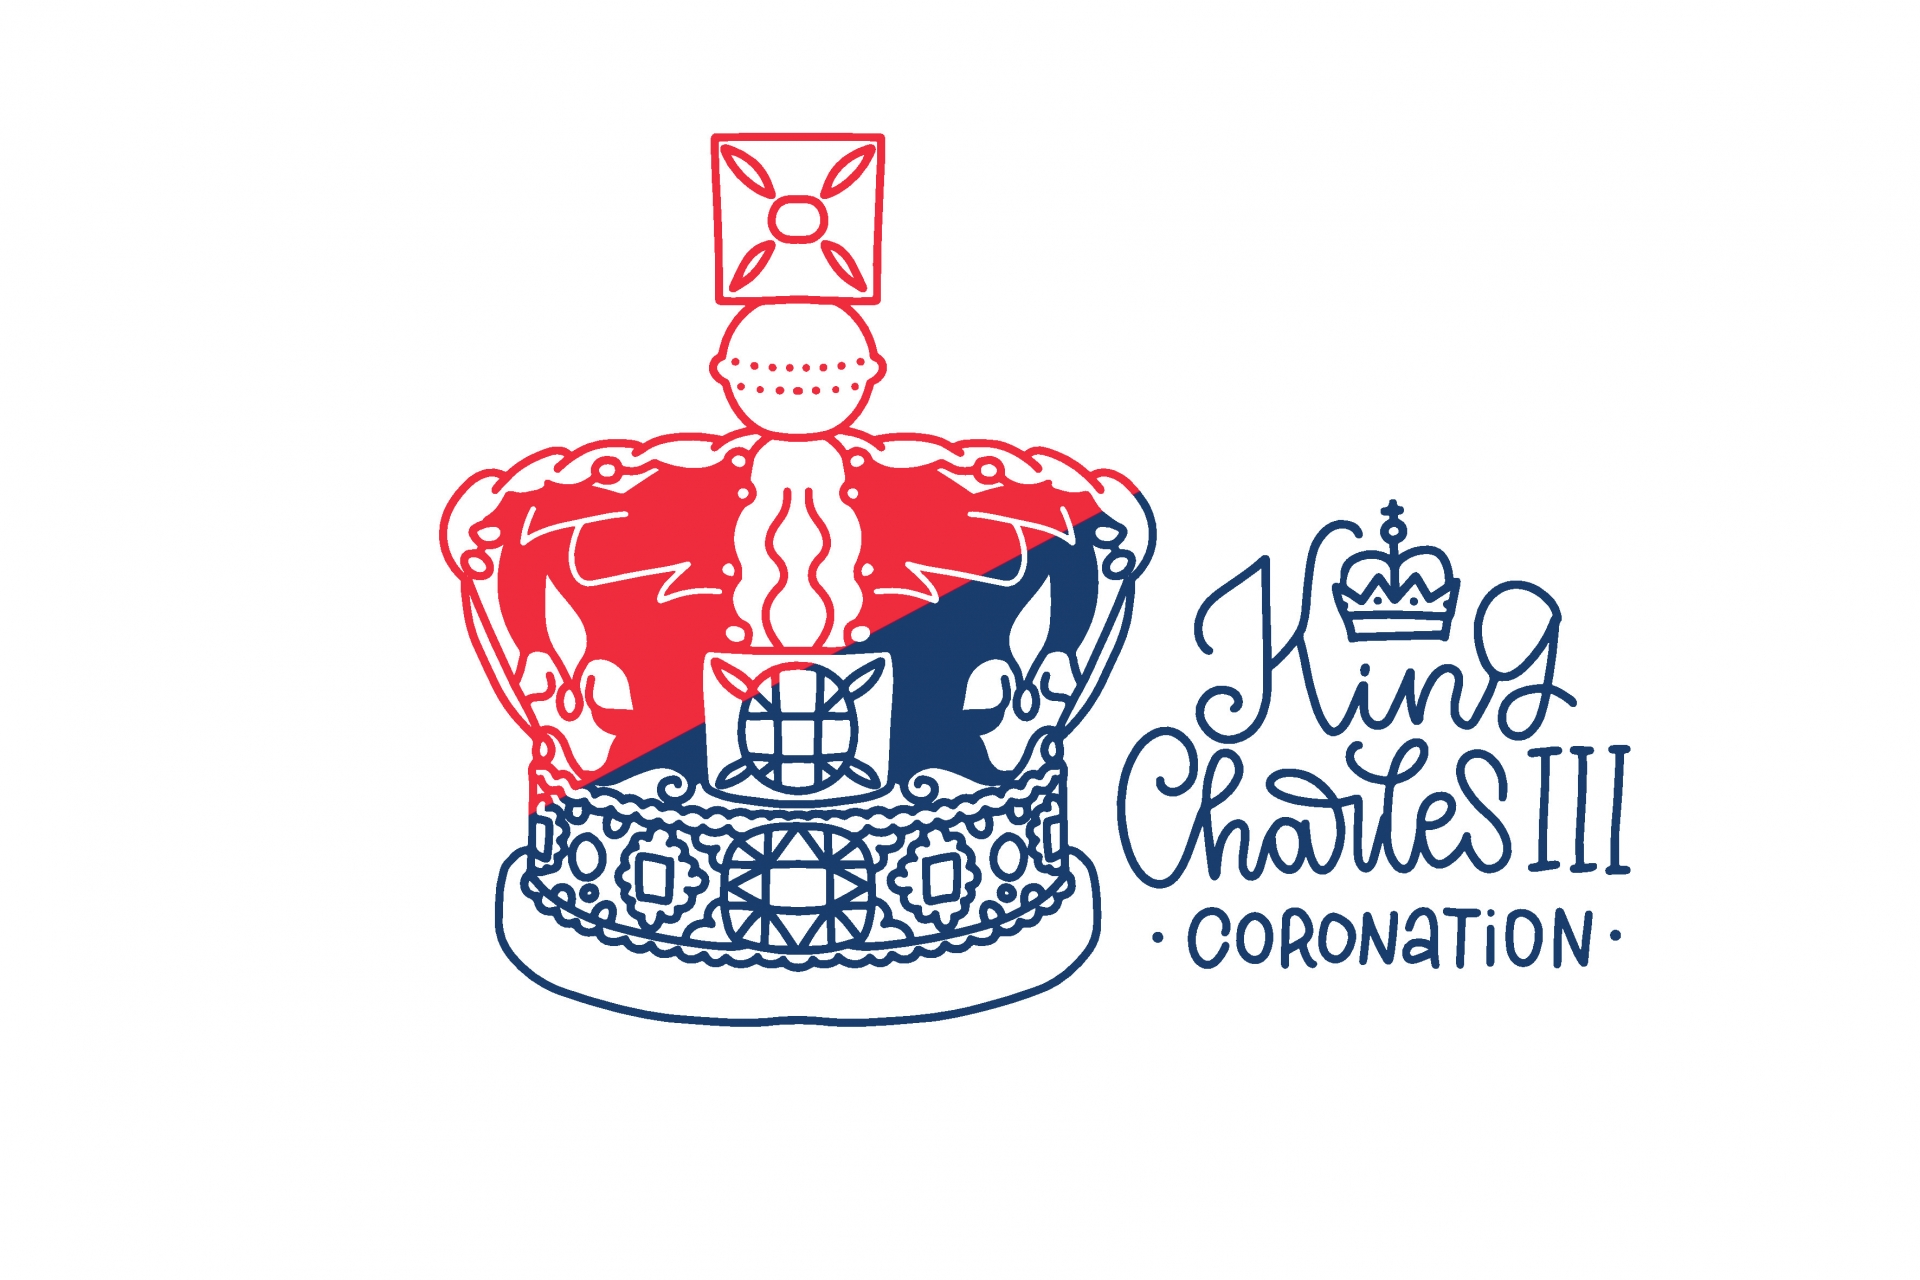 Books Fit For A King: Celebrate the Coronation of King Charles III with this collection of books